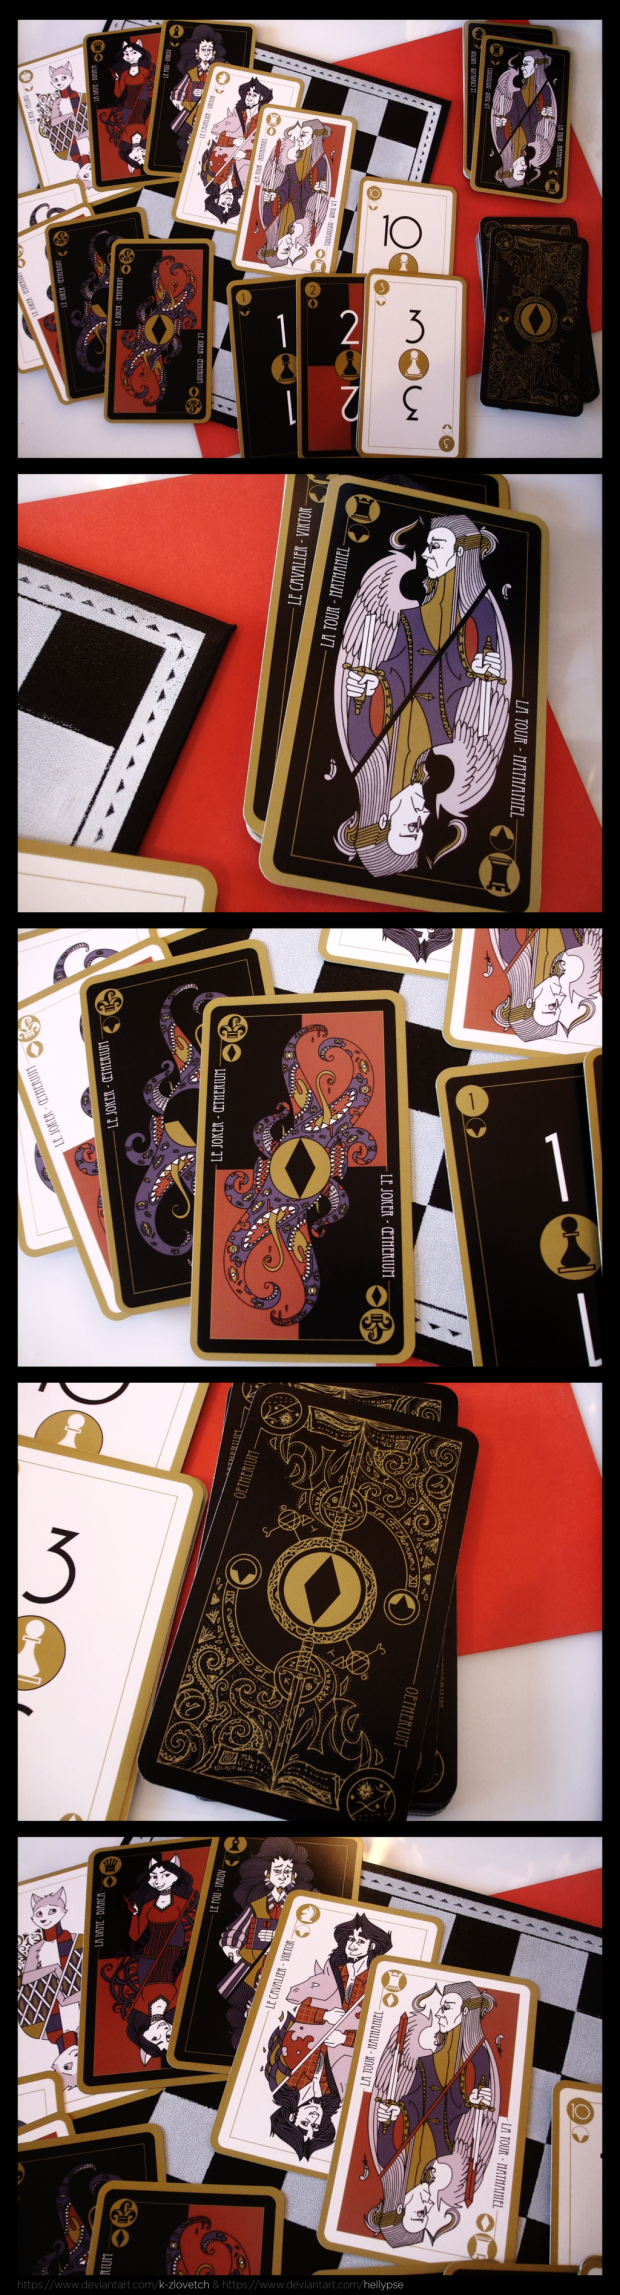 __collab___wip___oetherium_playing_card_game_by_k_zlovetch-d9tl8nh_ambiance.png